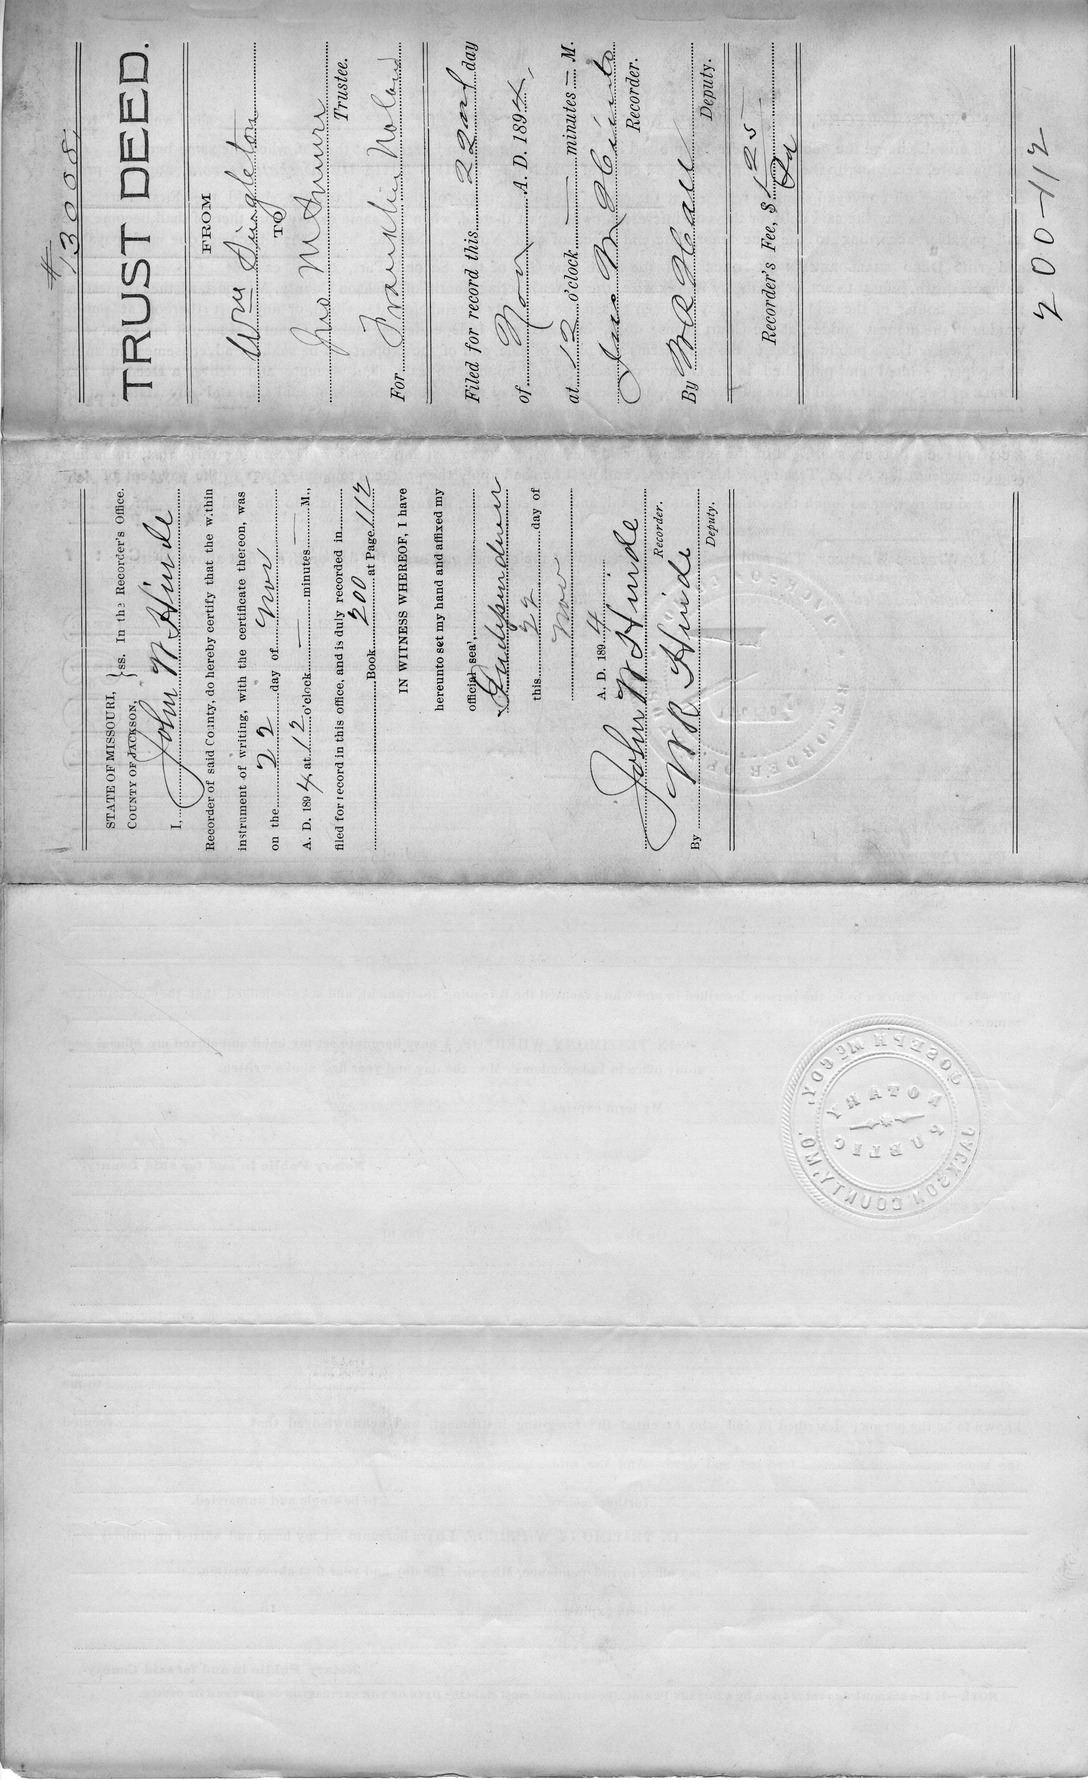 Trust Deed from William Singleton to John M. Smurr for Franklin Noland